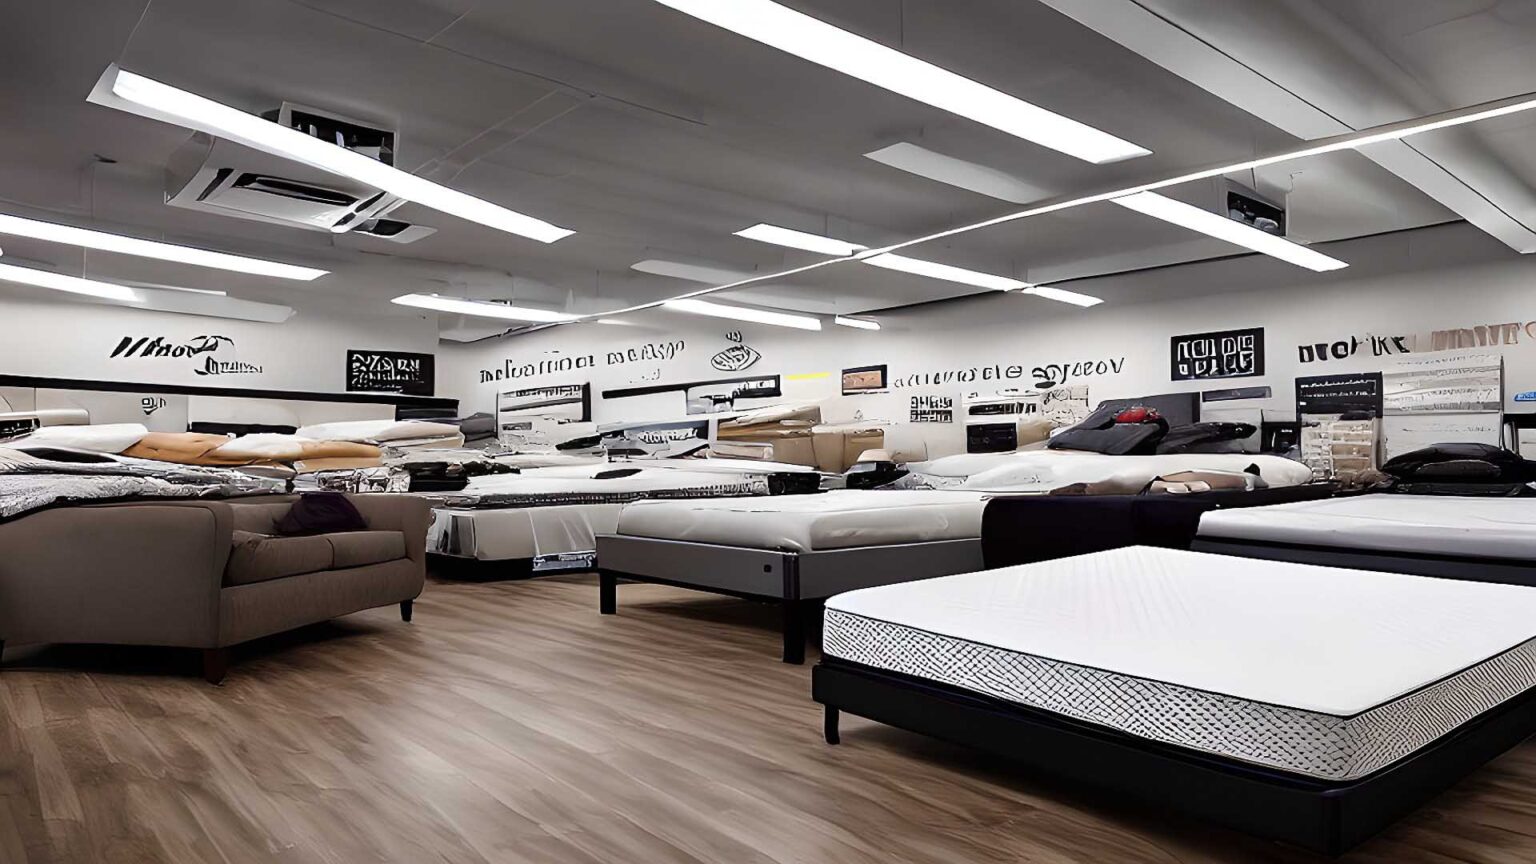 Mattress Stores, mattress dealers, and mattress retailers near me in Orland Park, IL